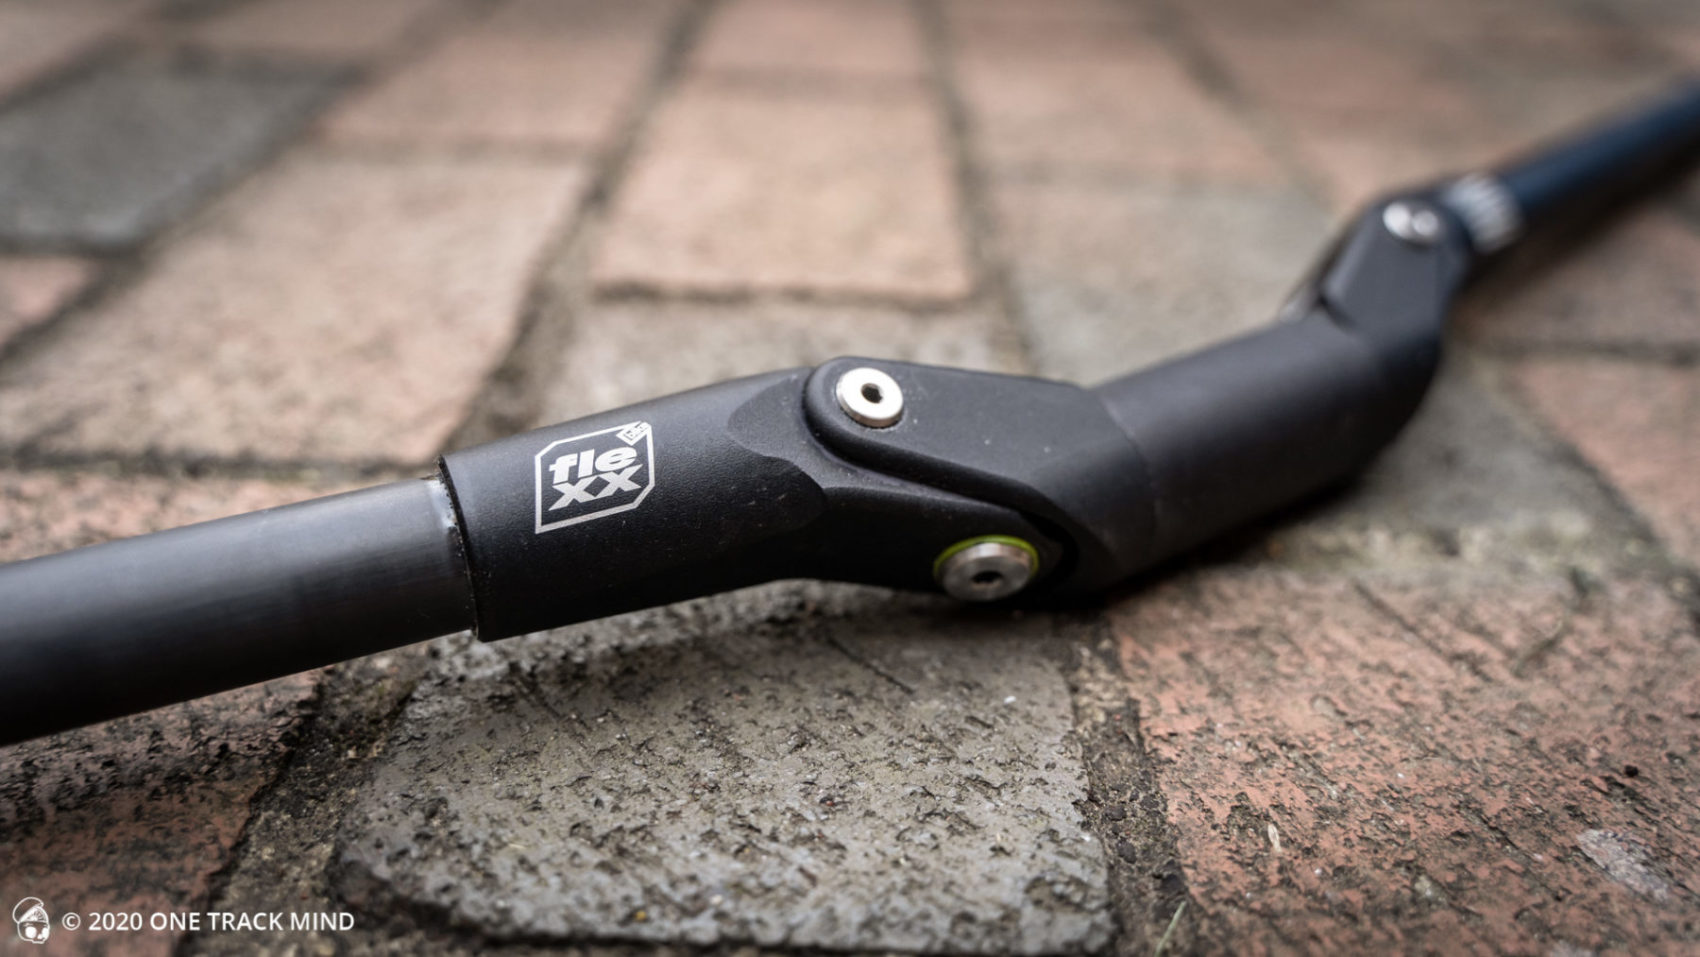 The Fasst Flexx Handlebar Review – is this the €500 arm pump